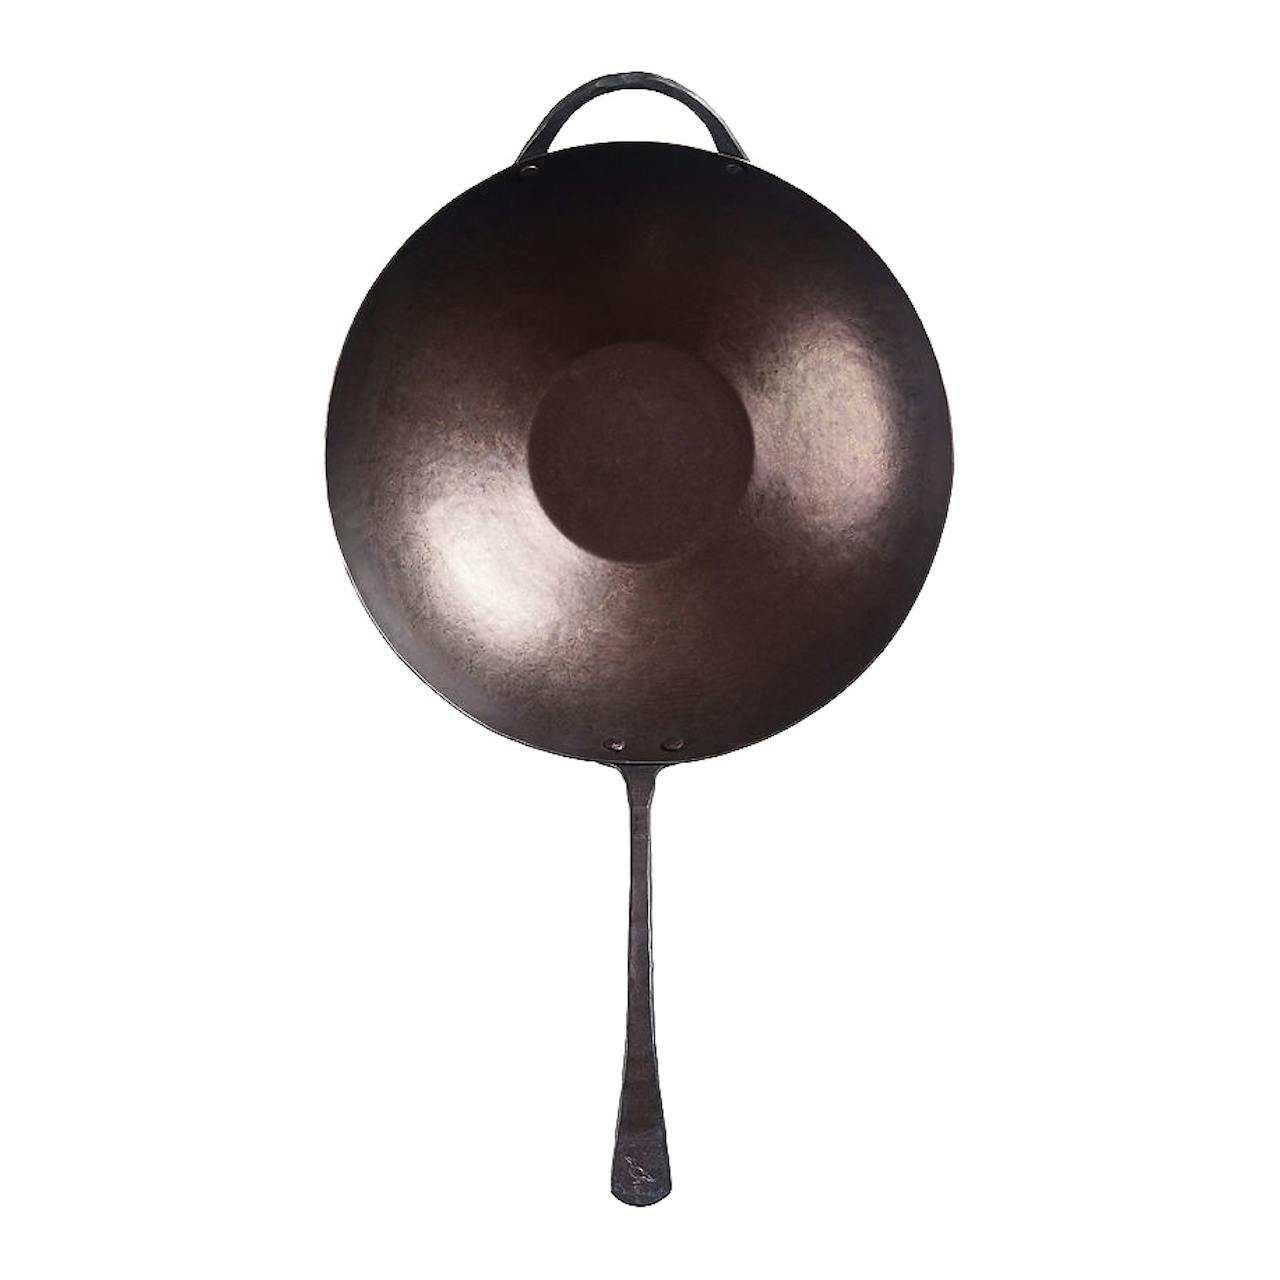 https://huckberry.imgix.net/spree/products/657582/original/72370_Smithey_Ironware_Co._Hand-Forged_Carbon_Steel_Wok_Carbon_Steel_01_PDP.jpg?auto=format%2C%20compress&crop=top&fit=clip&cs=tinysrgb&w=1280&ixlib=react-9.5.2&h=1280